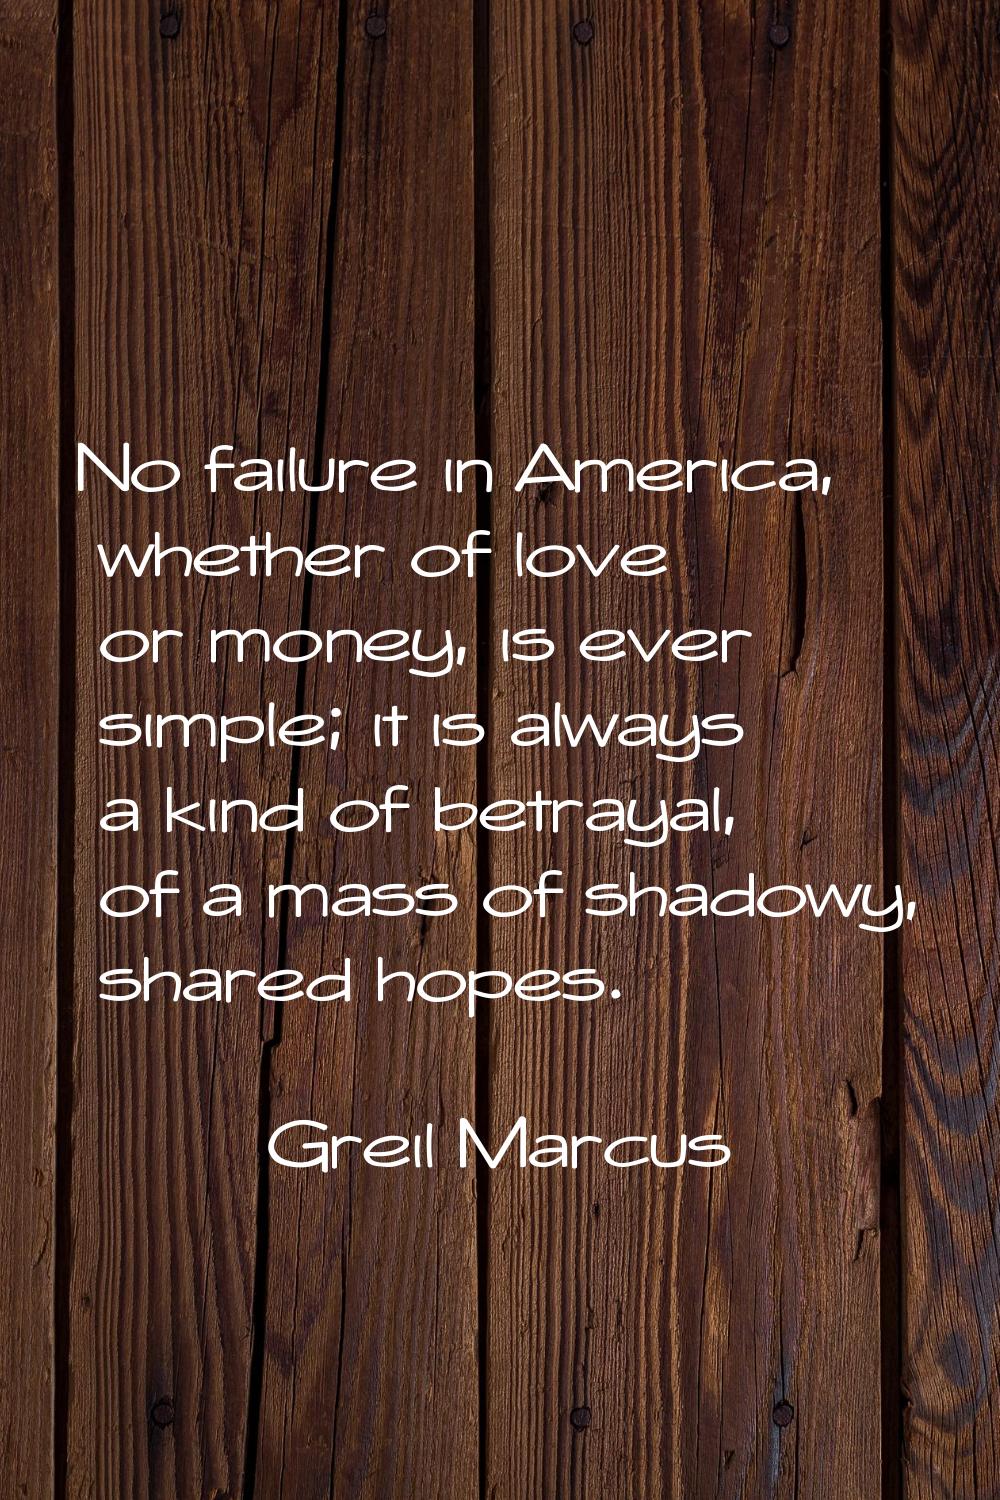 No failure in America, whether of love or money, is ever simple; it is always a kind of betrayal, o